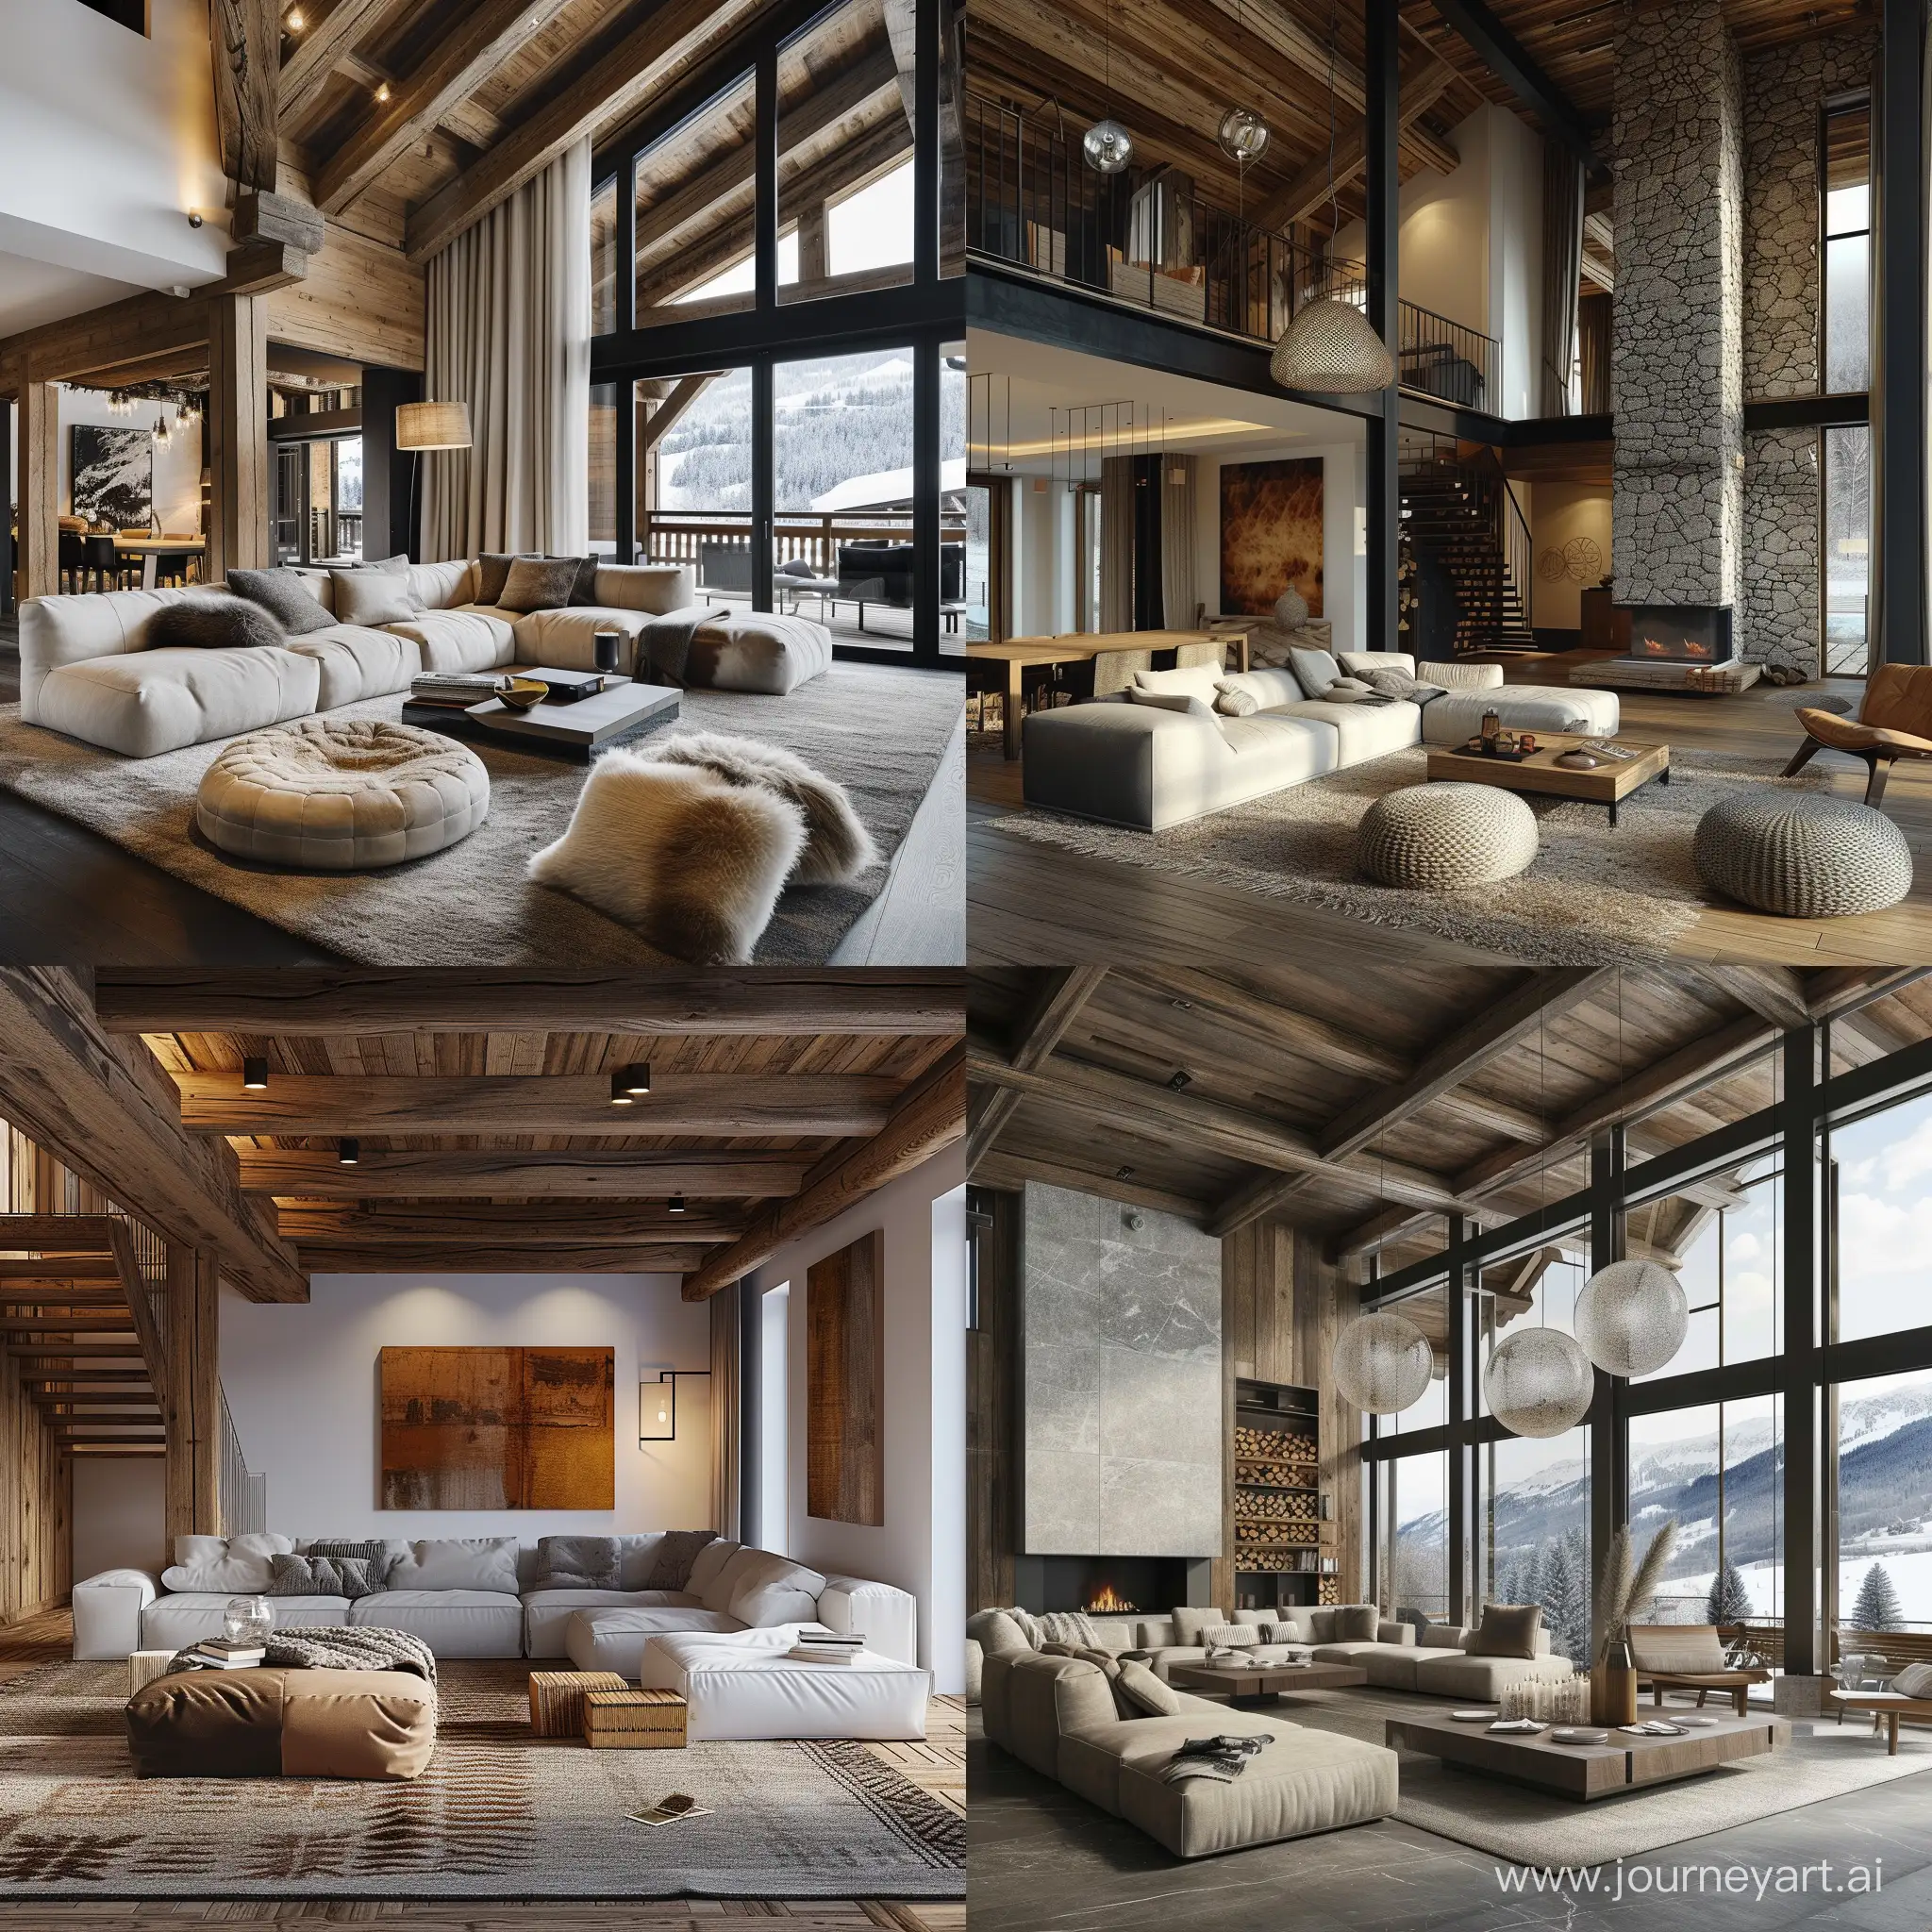 Modern-Chalet-Style-Interior-Design-with-Fireplace